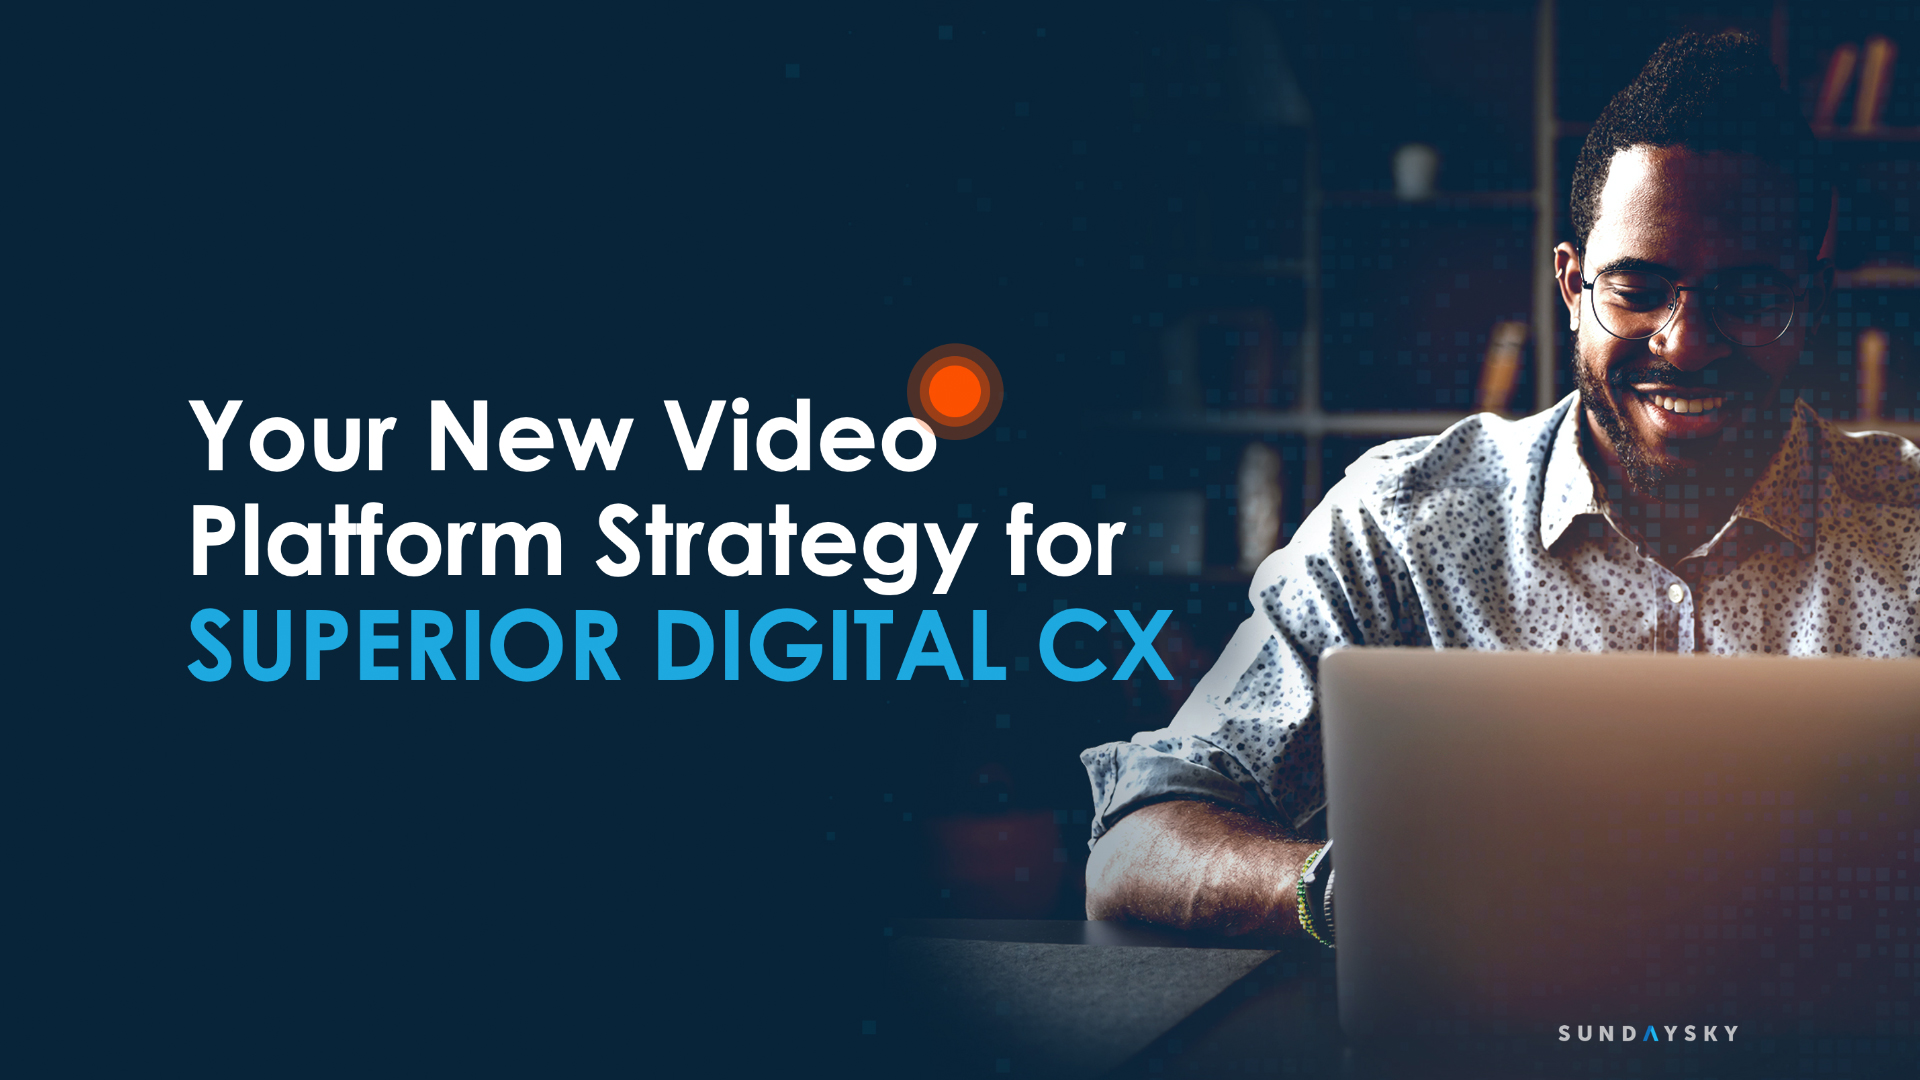 A Video Platform for CX Strategy